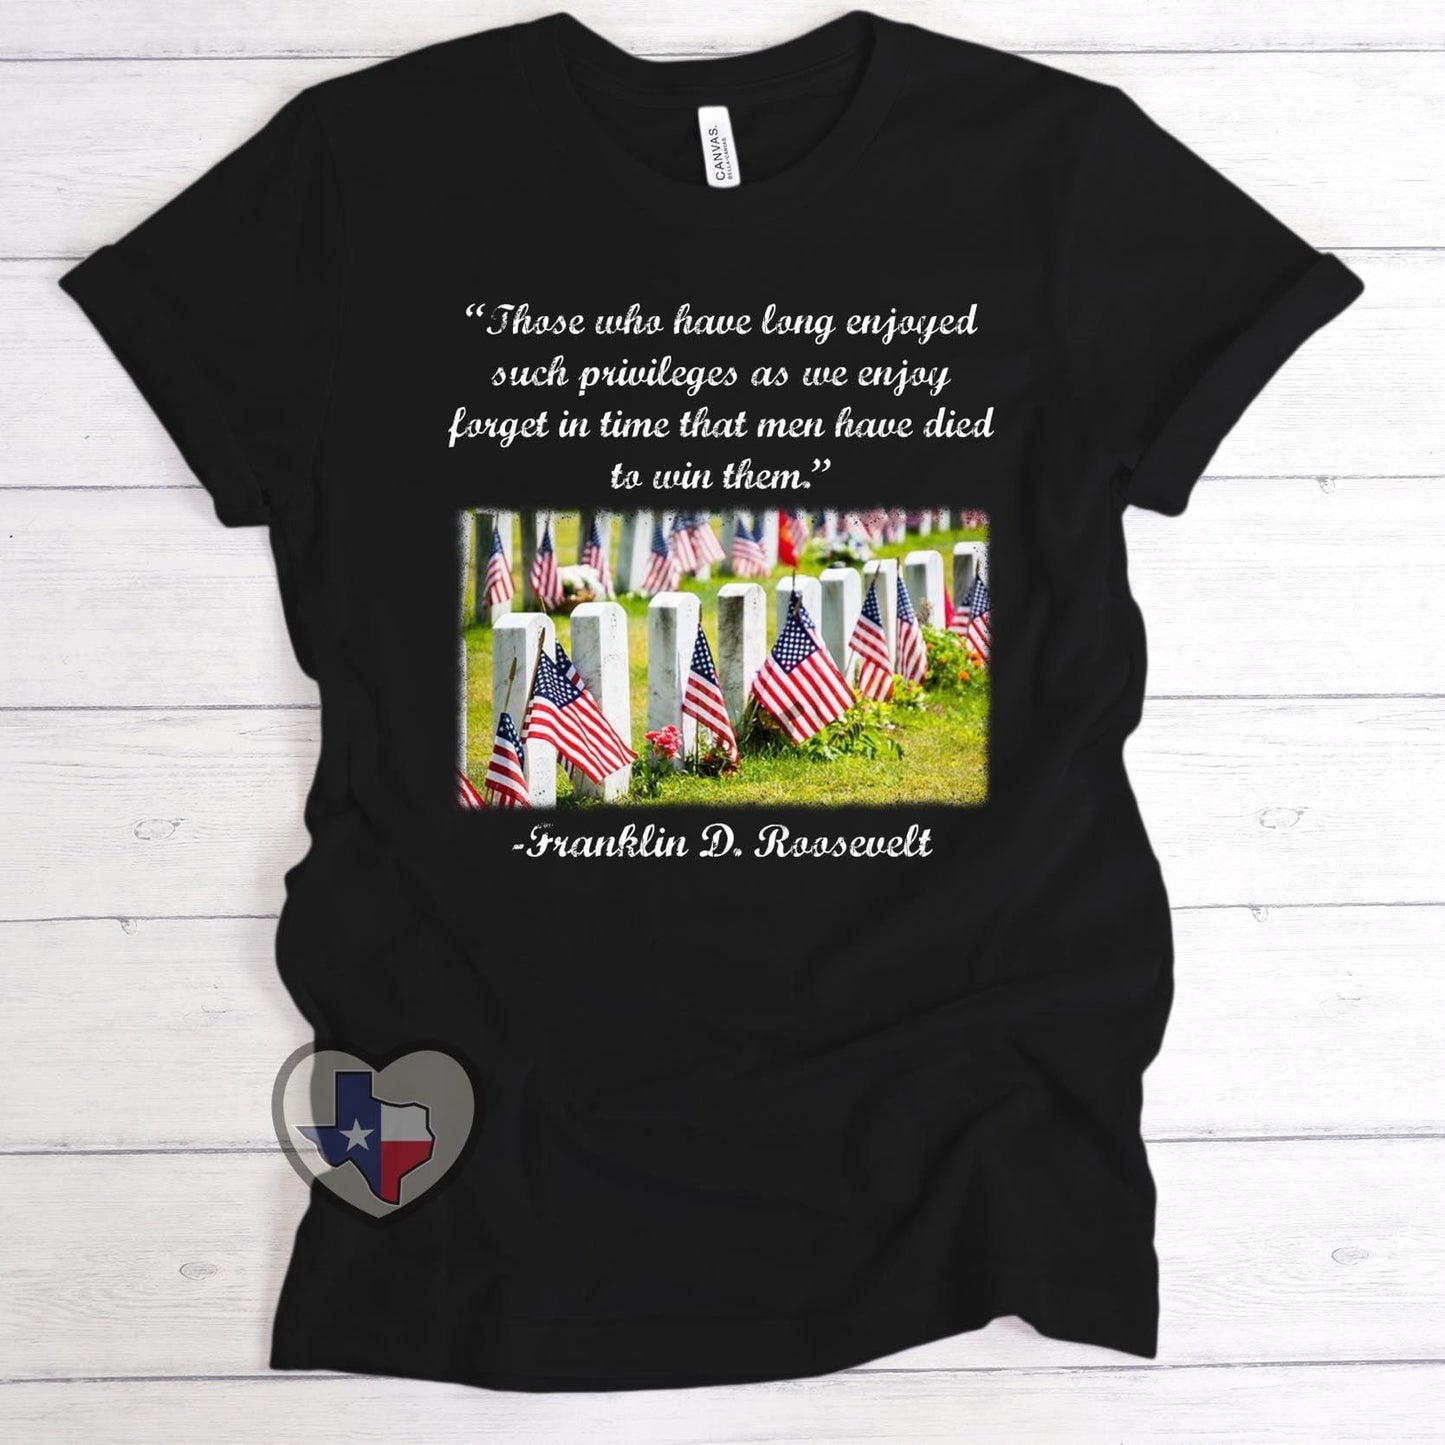 Arlington Cemetery Roosevelt *EXCLUSIVE* HIGH HEAT - Texas Transfers and Designs